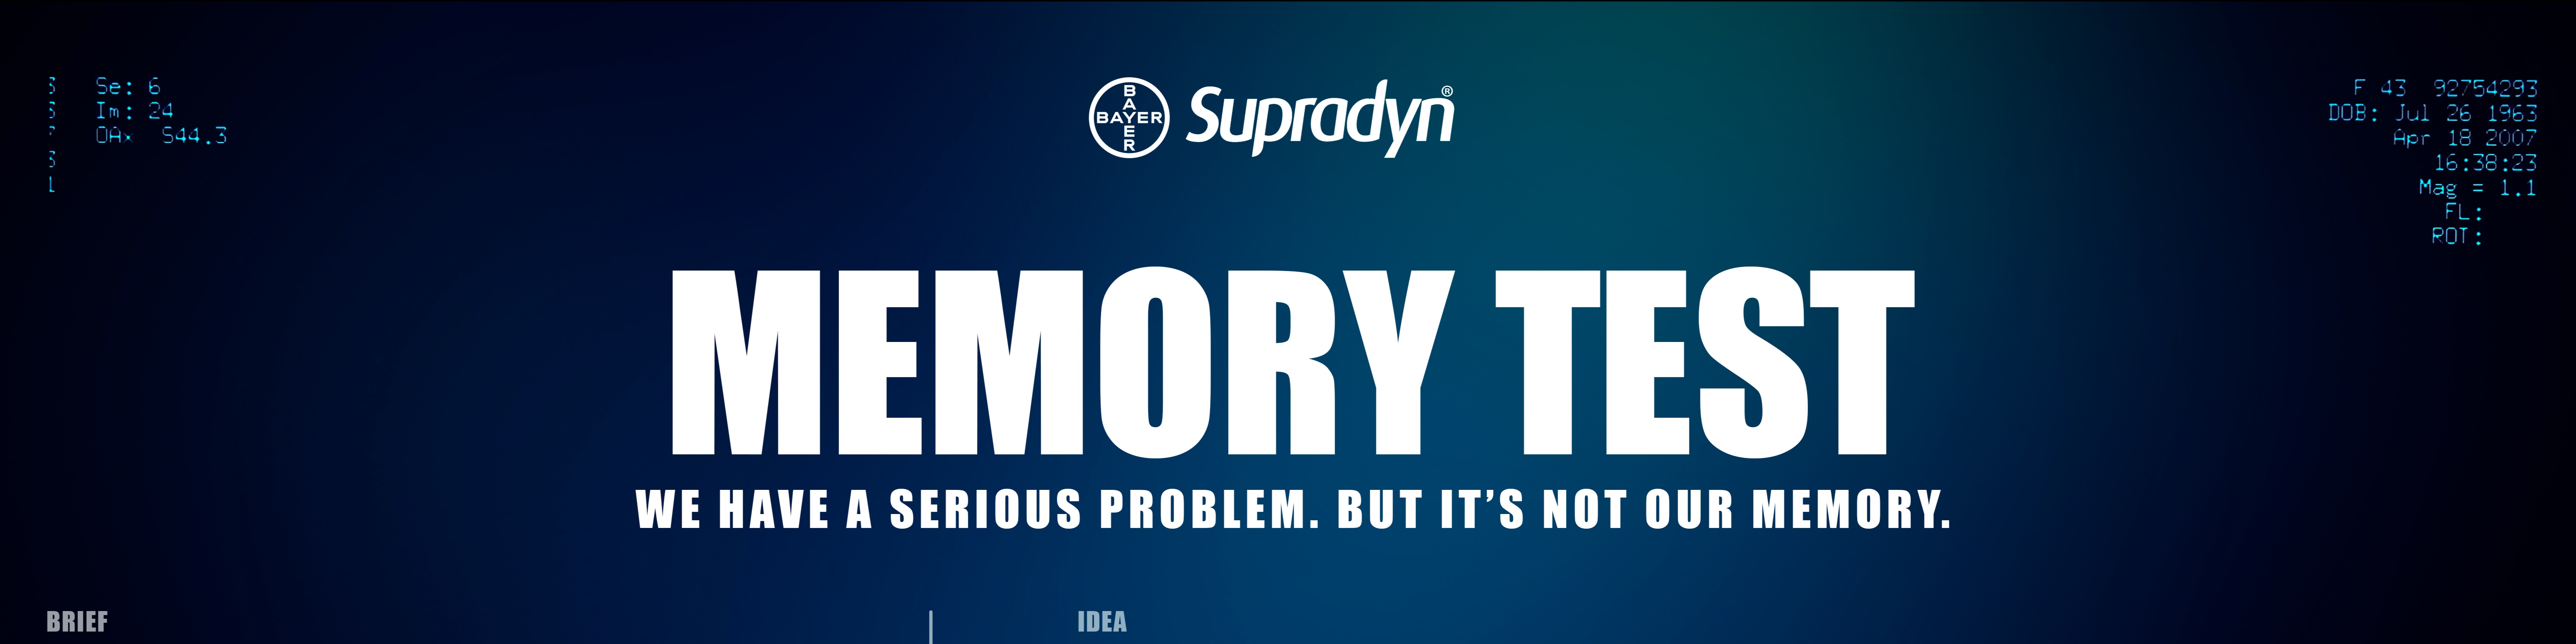 Supradyn's advert is an original memory test that will surprise you